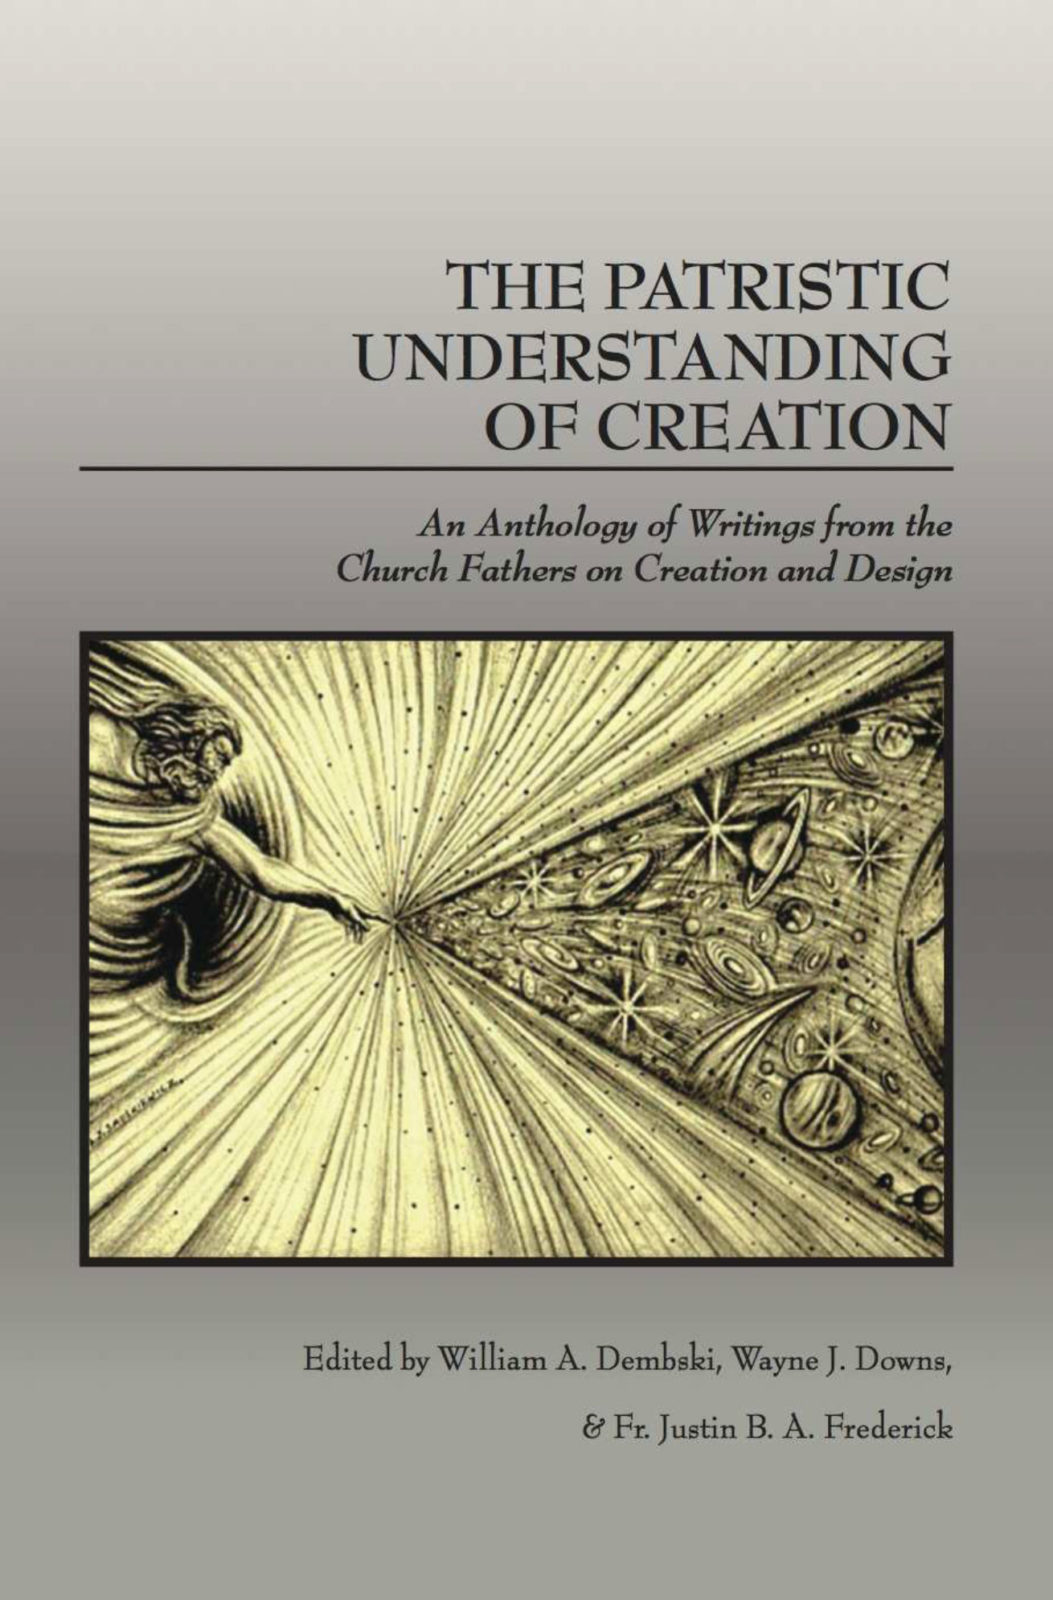 The Patristic Understanding of Creation